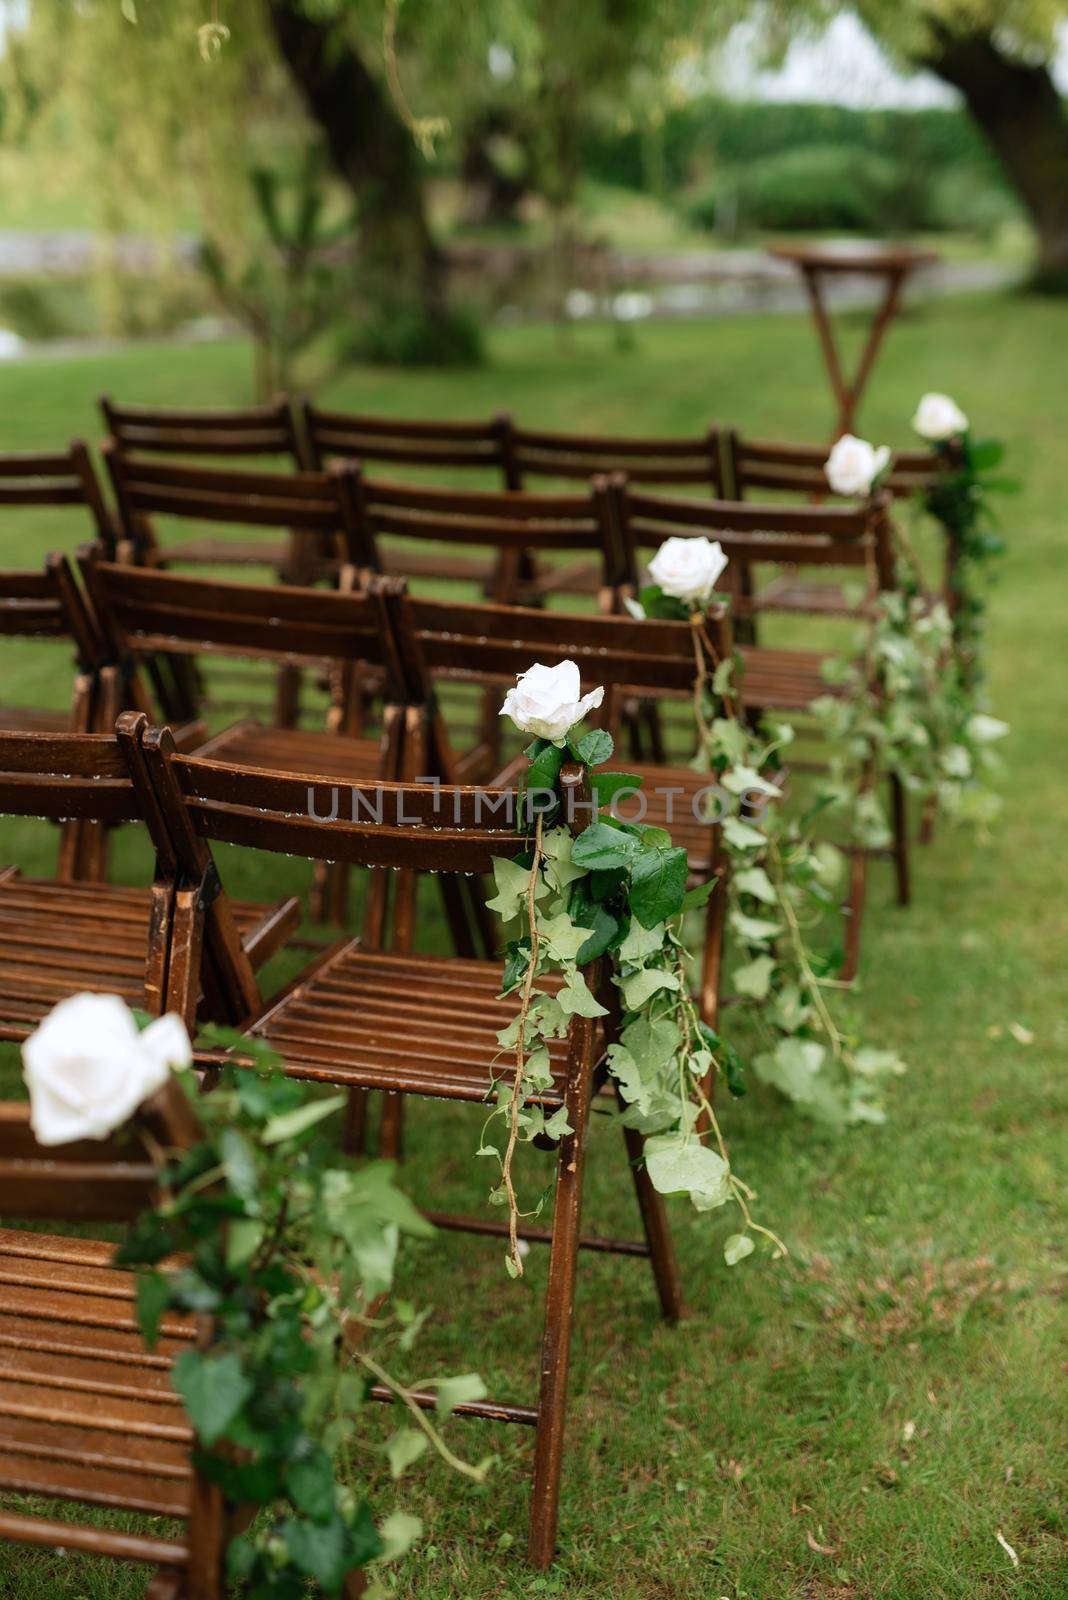 wedding ceremony area with dried flowers in a meadow in a green forest